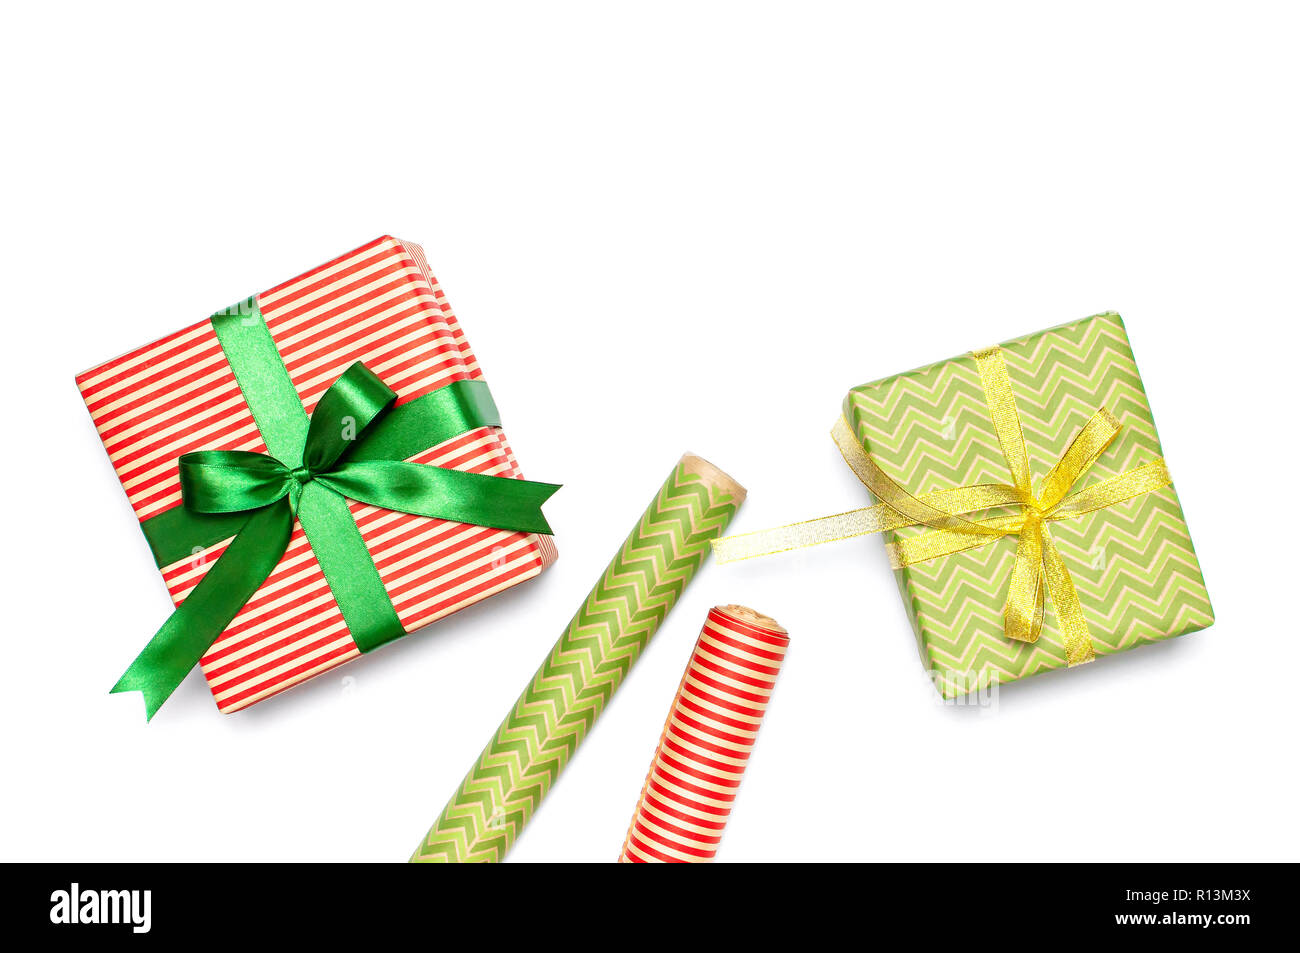 Scissors, Tape, Ribbon And Wrapping Paper On A Gift Box. Focus On